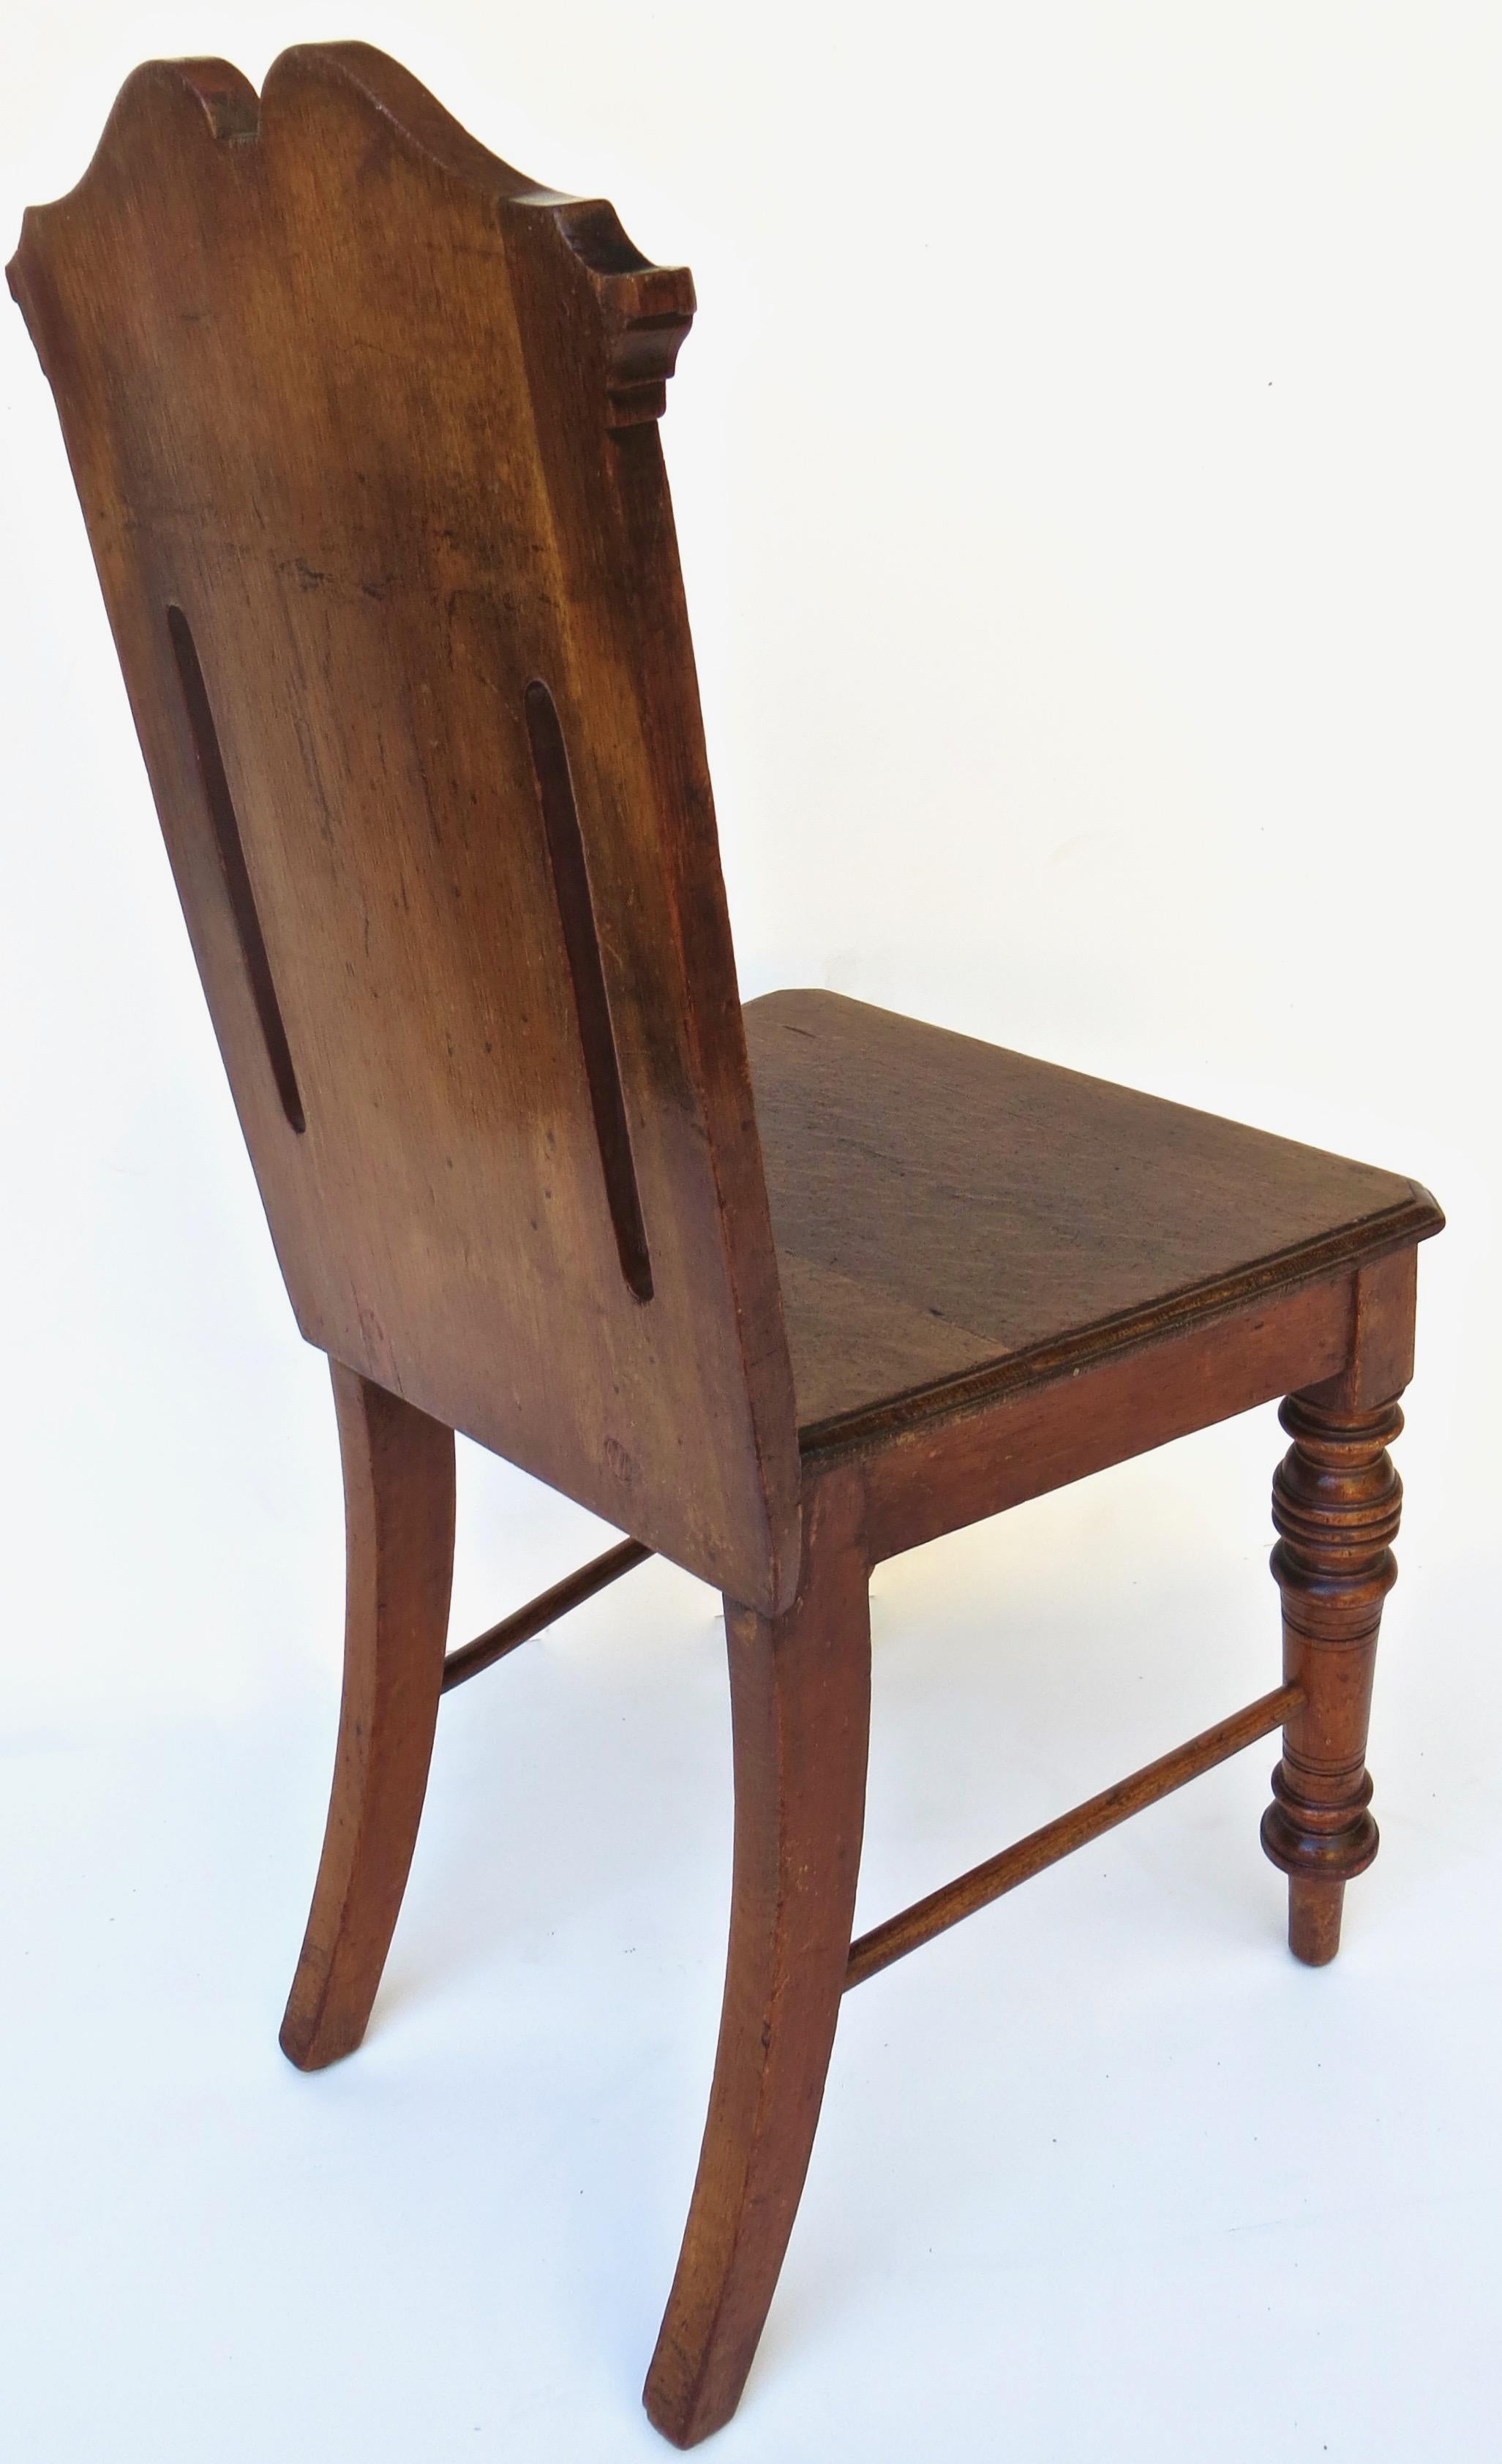 Hand-Crafted Unique English Oak Side Chair, Circa 1885 For Sale